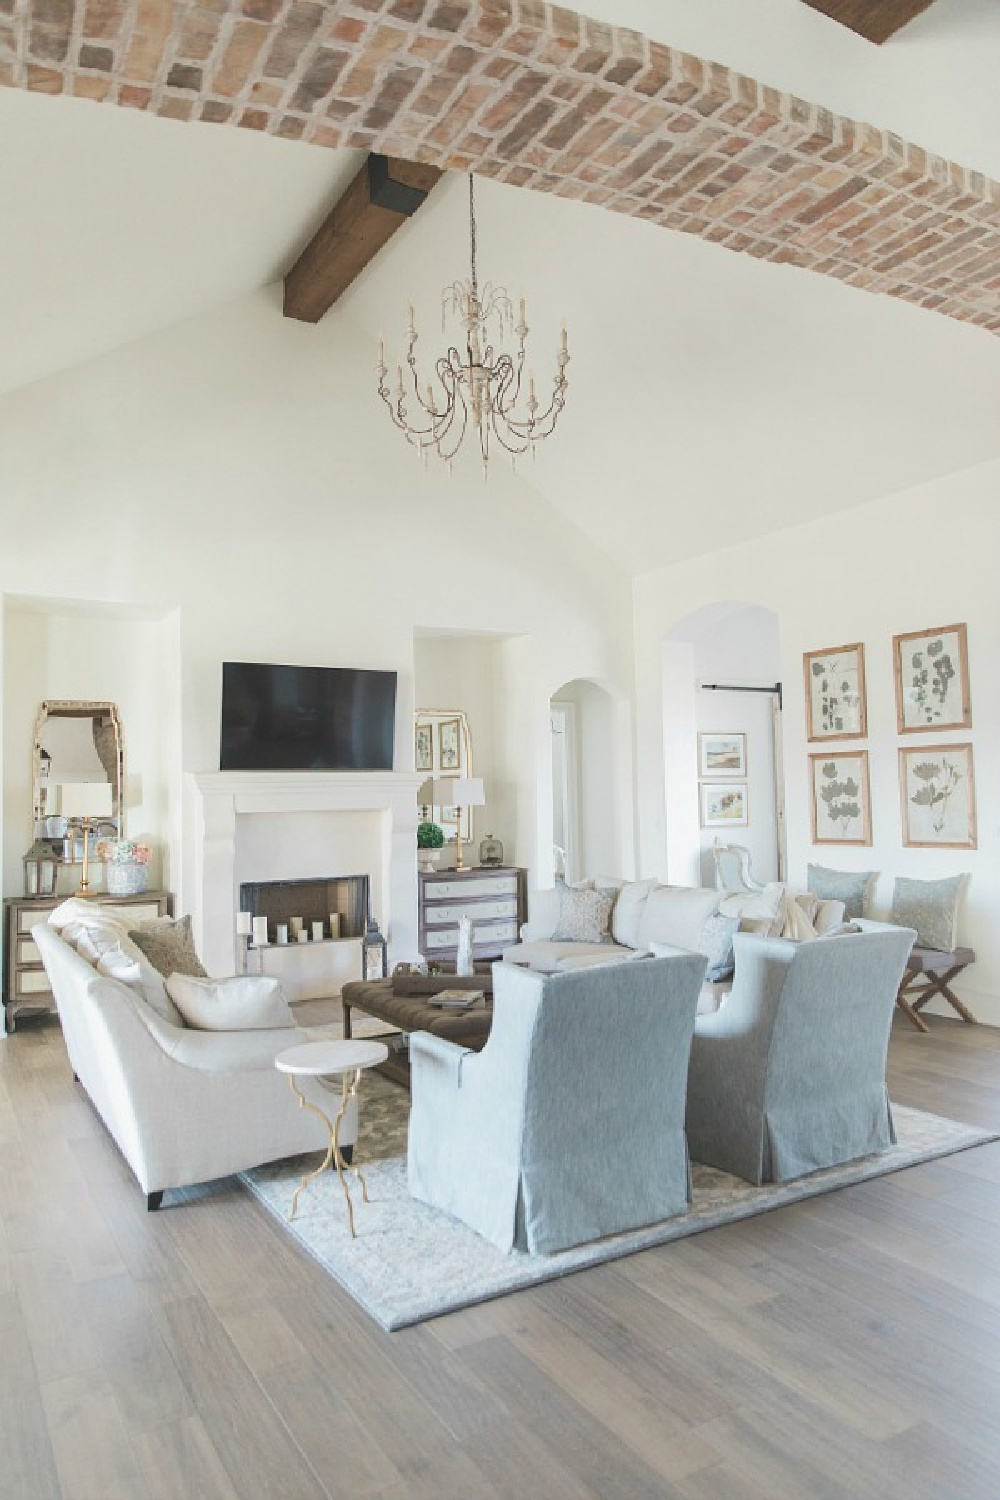 Sherwin Williams Alabaster paint color in elegant French country great room with cathedral ceiling, beams, fireplace, and French chandelier. Brit Jones Design.